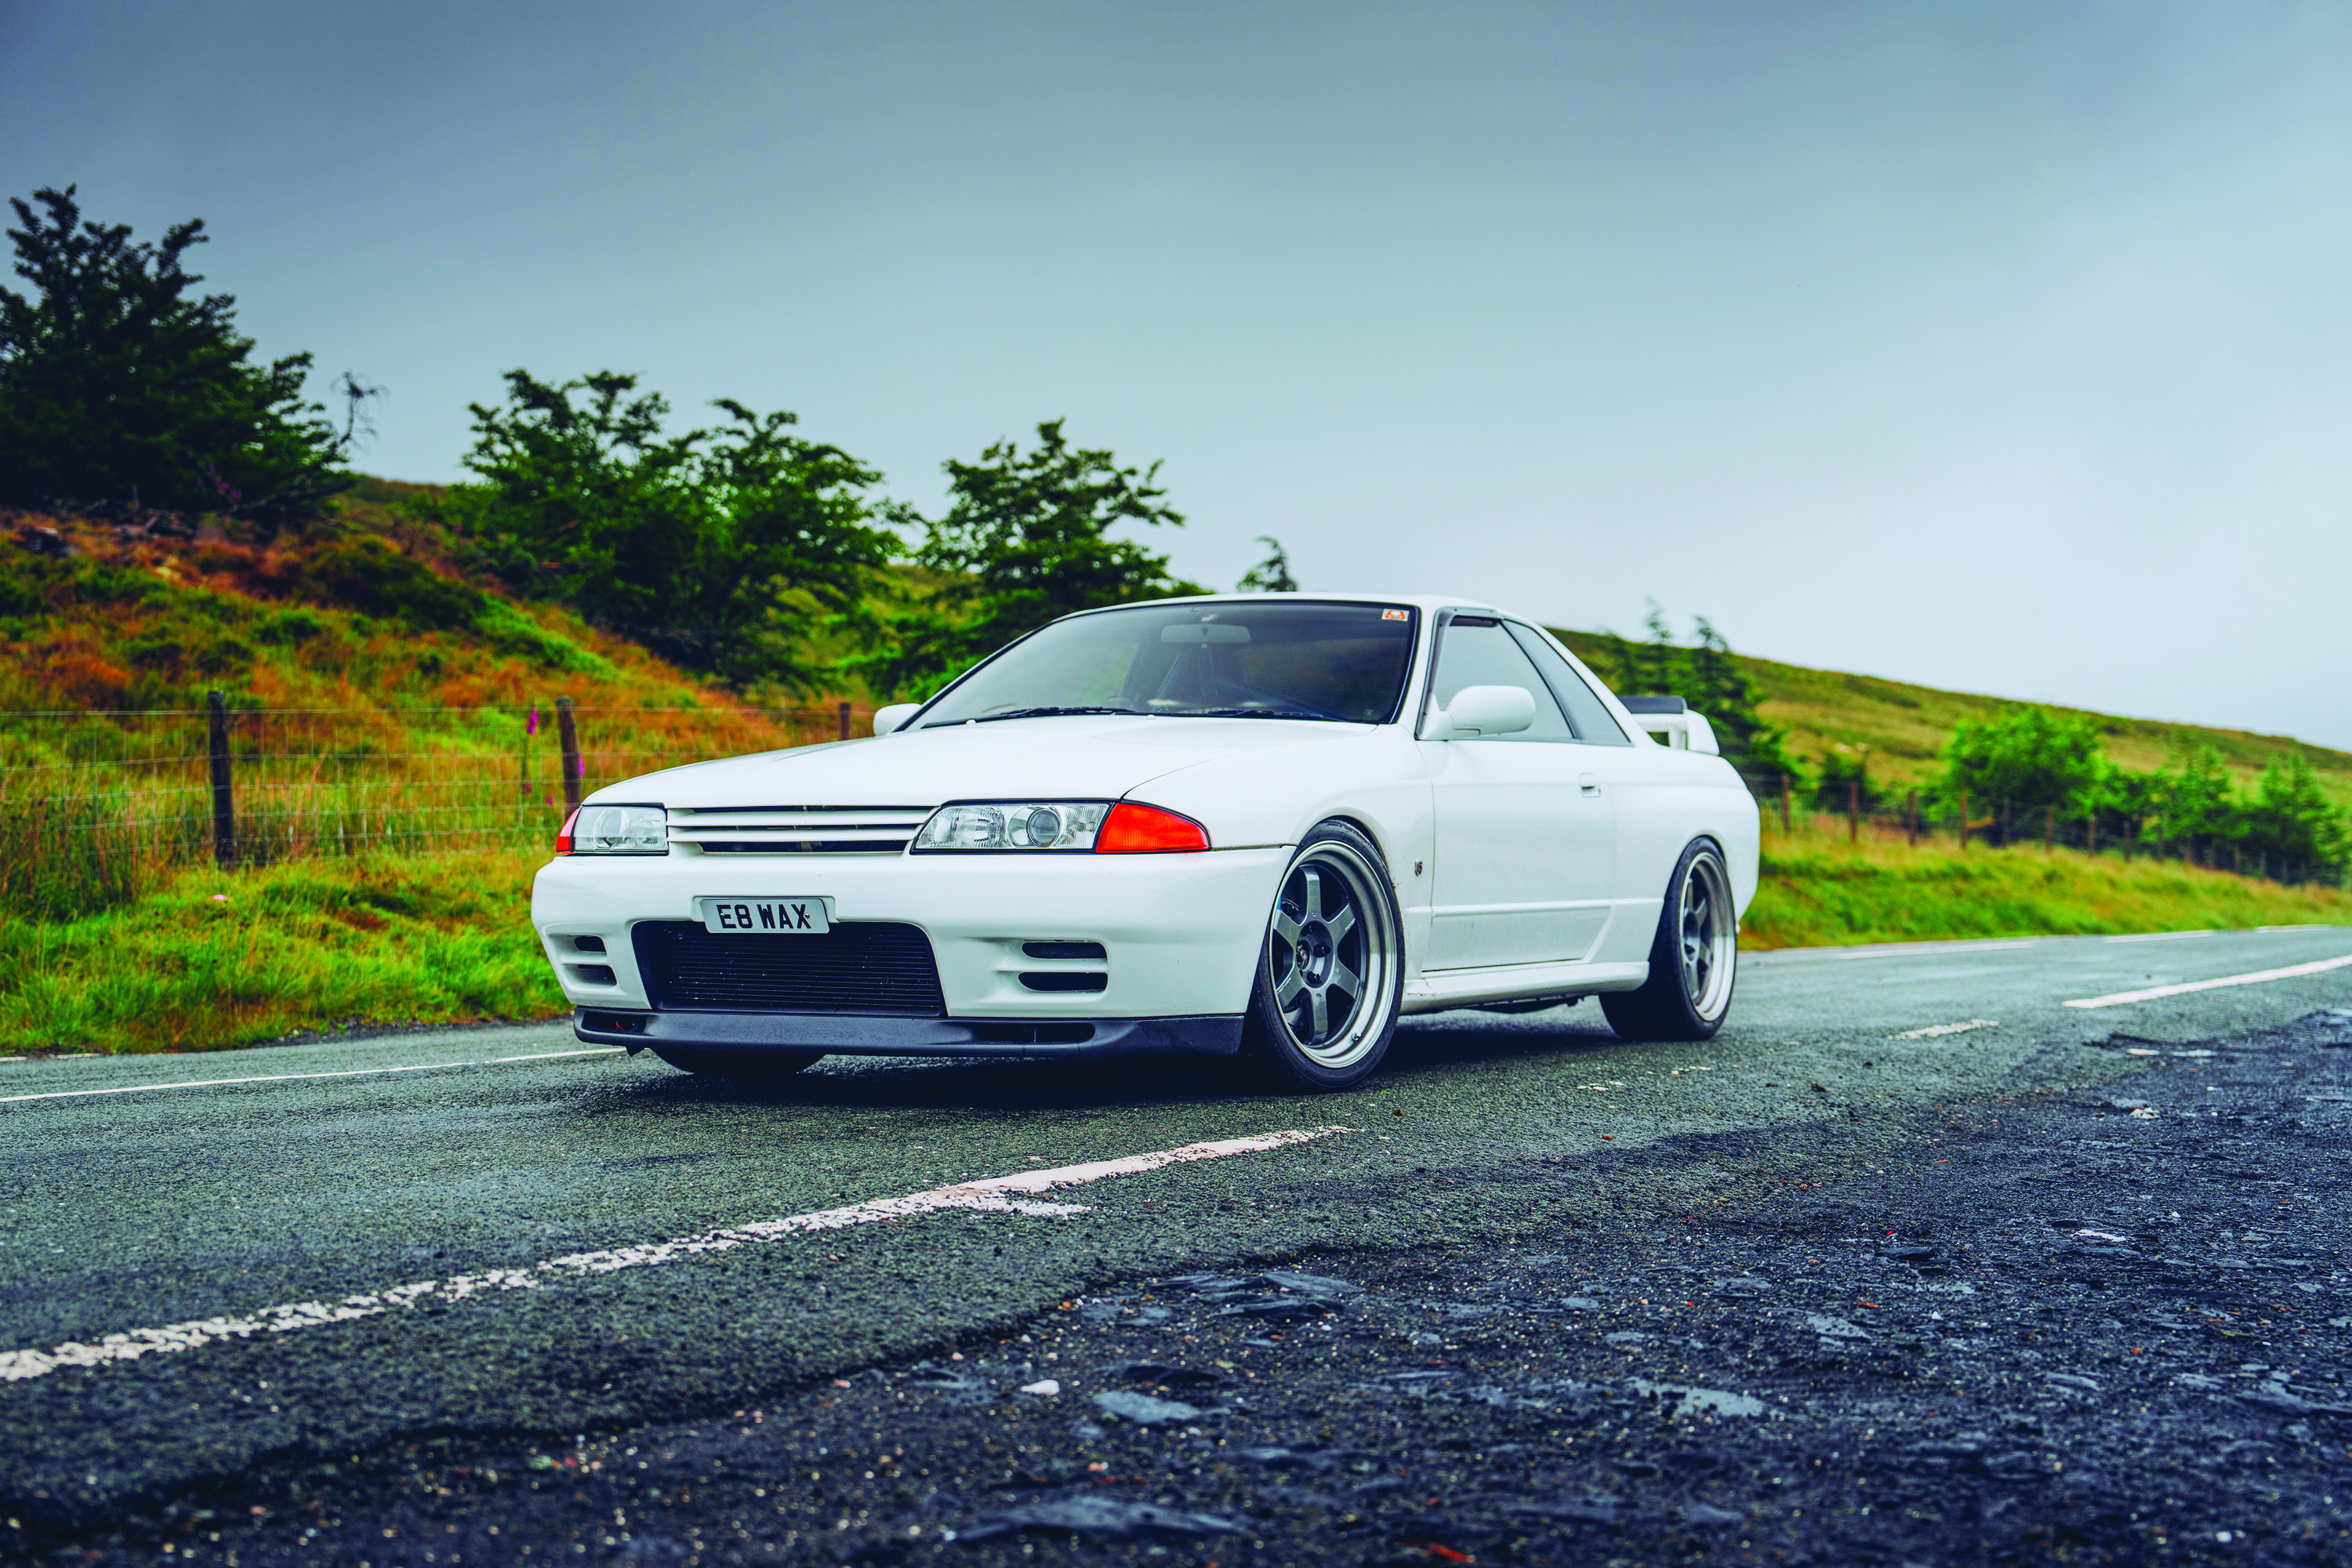 Modifications Light A Fire Inside The All-Conquering Nissan Skyline GT-R R32